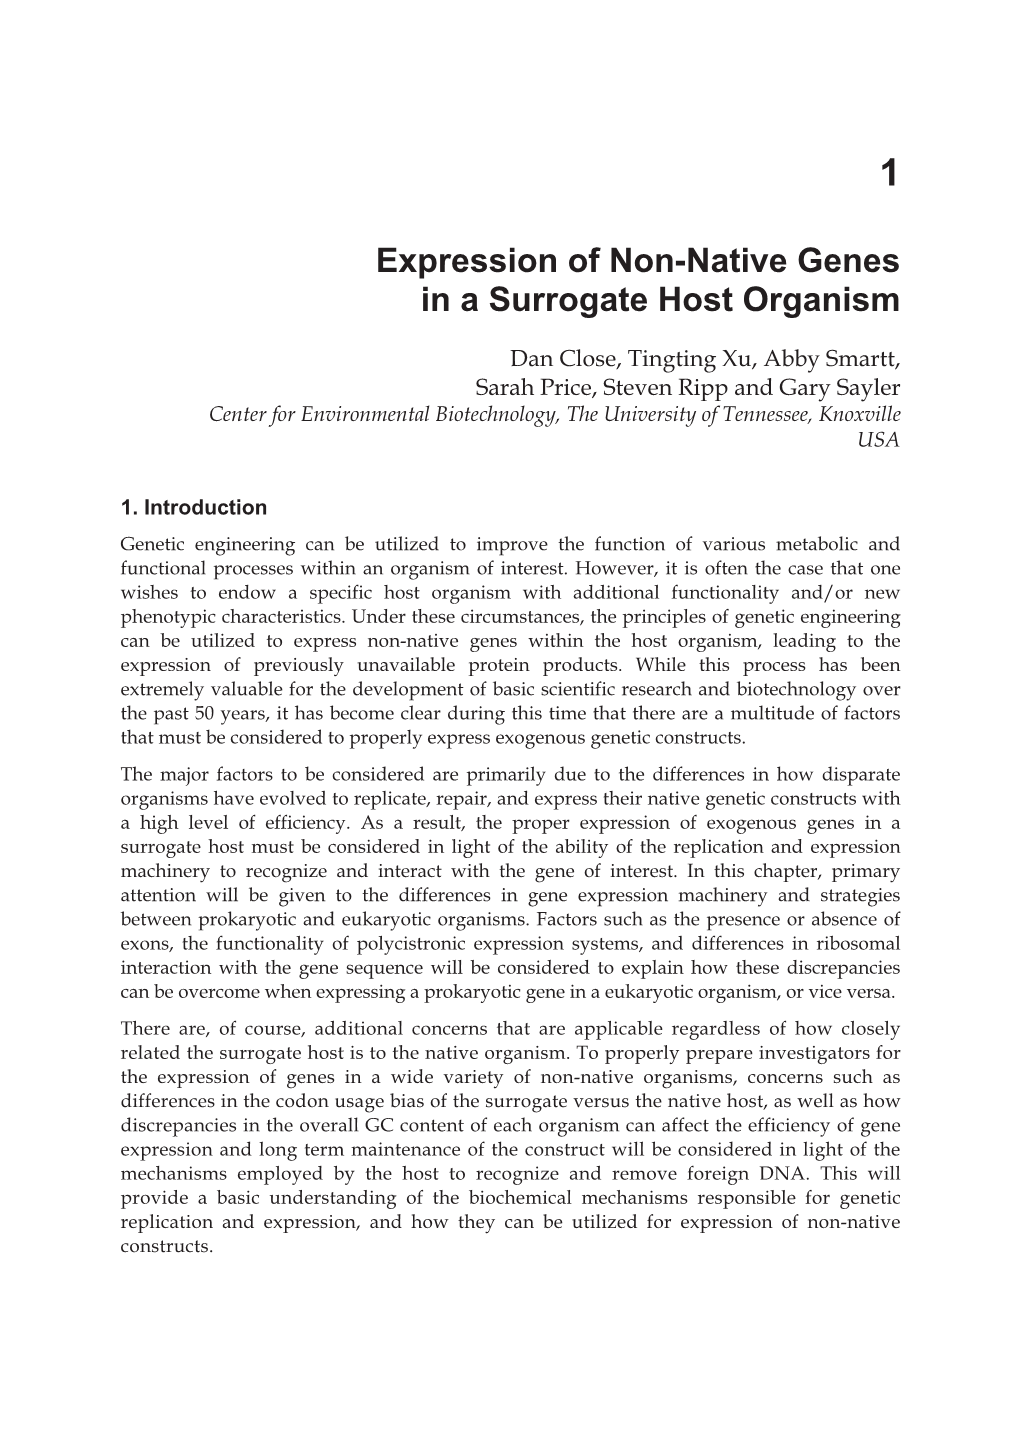 Expression of Non-Native Genes in a Surrogate Host Organism